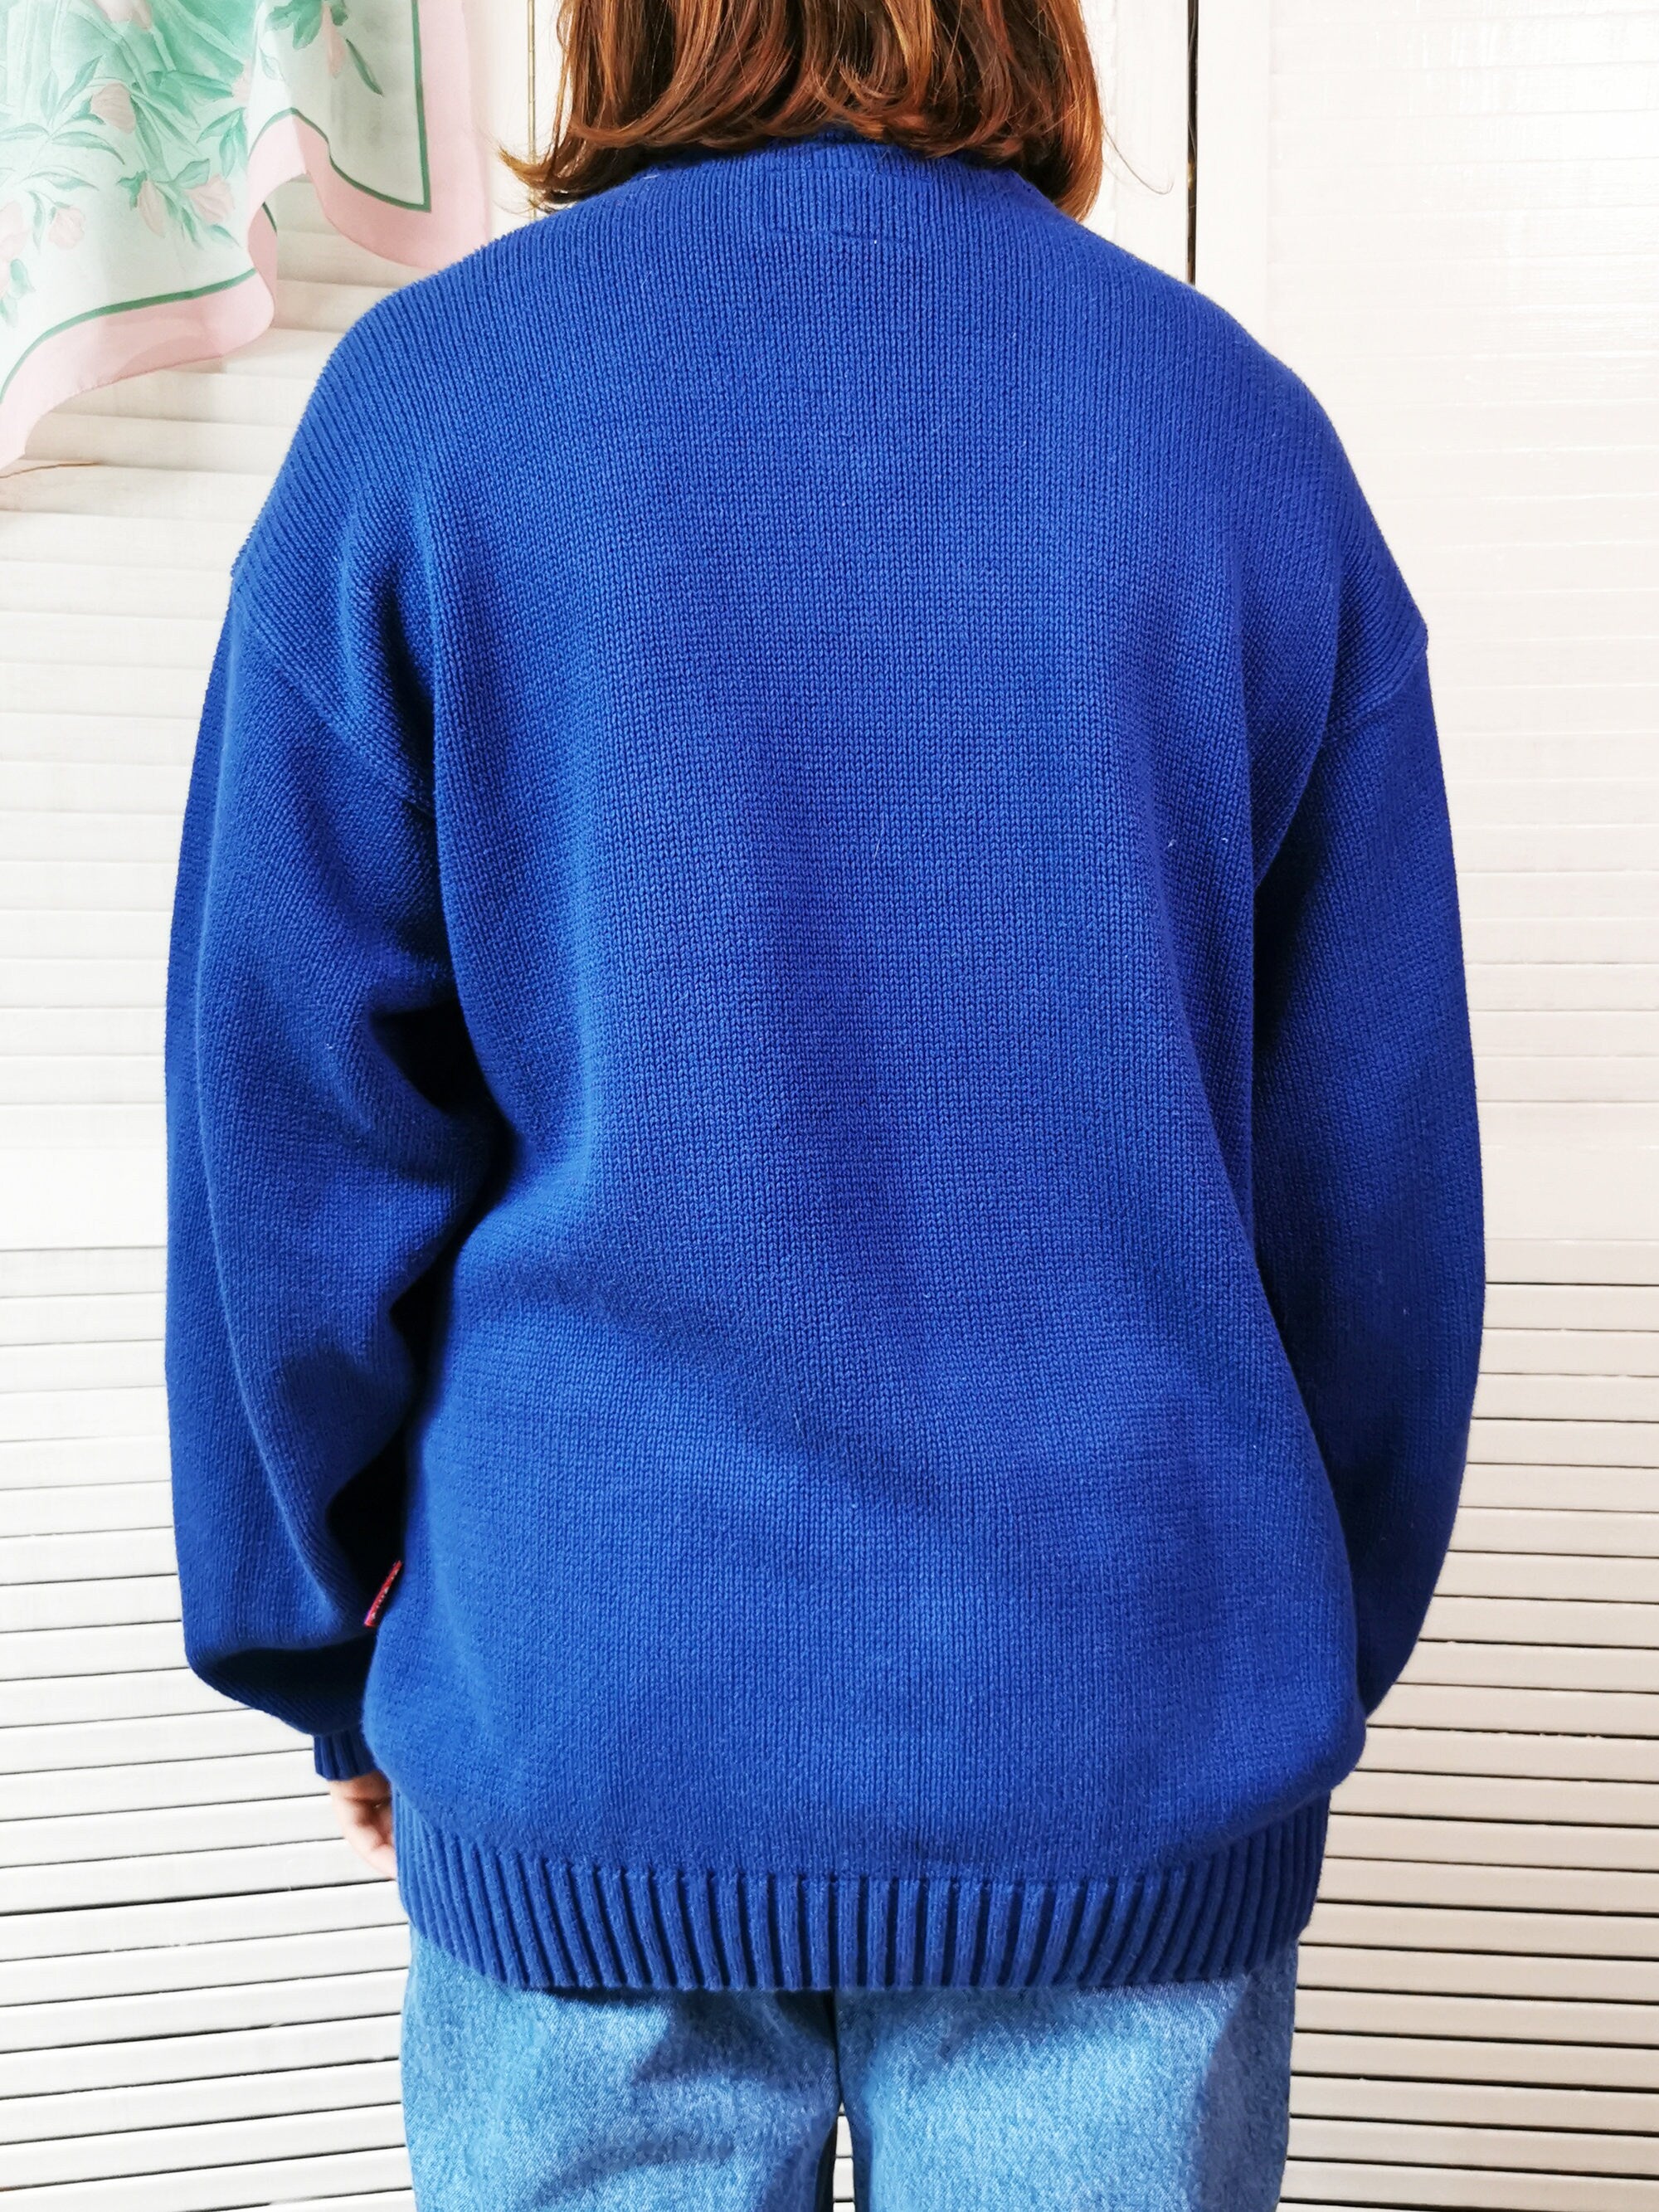 Vintage 90s 1/4 zipped knitted blue cotton unisex jumper